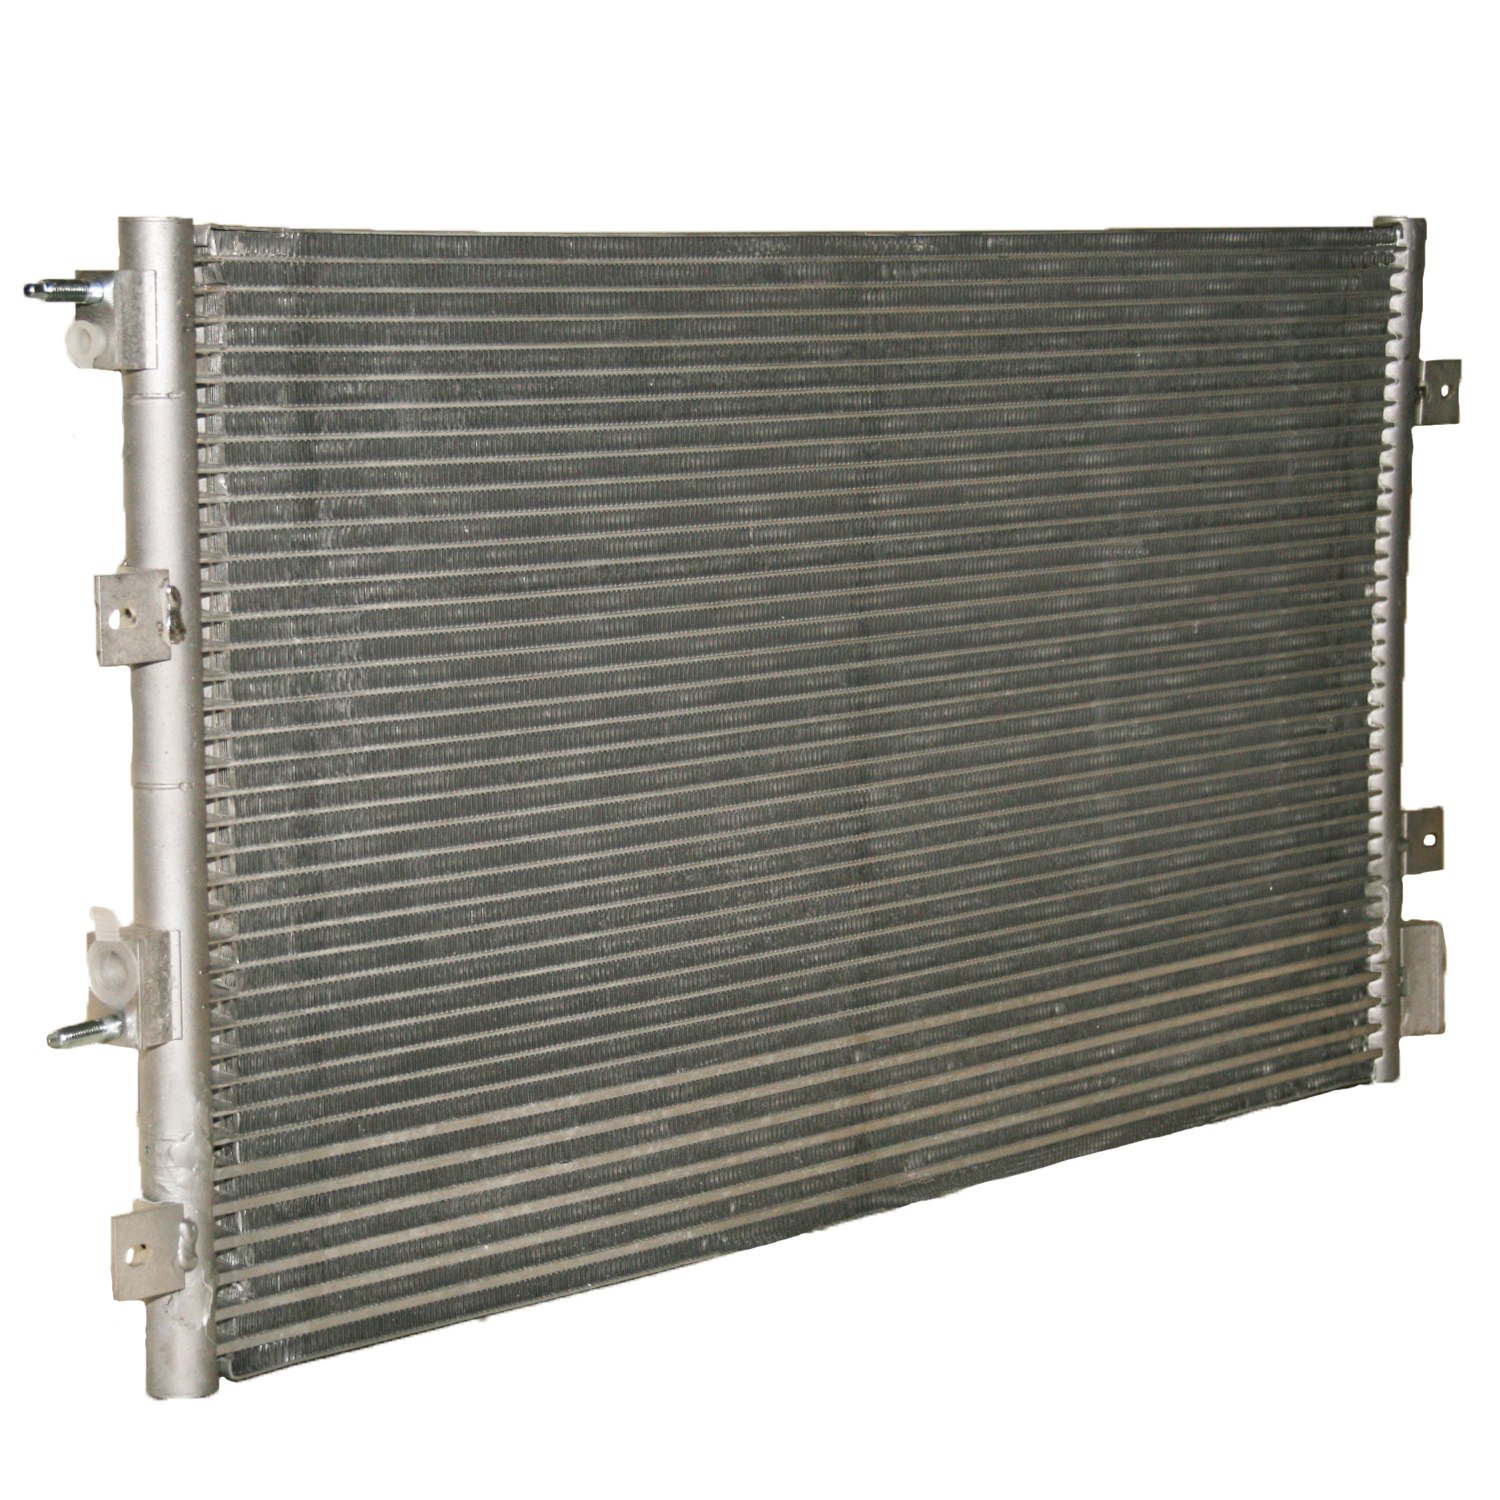 TCW Condenser 44-4995 New Product Image field_60b6a13a6e67c